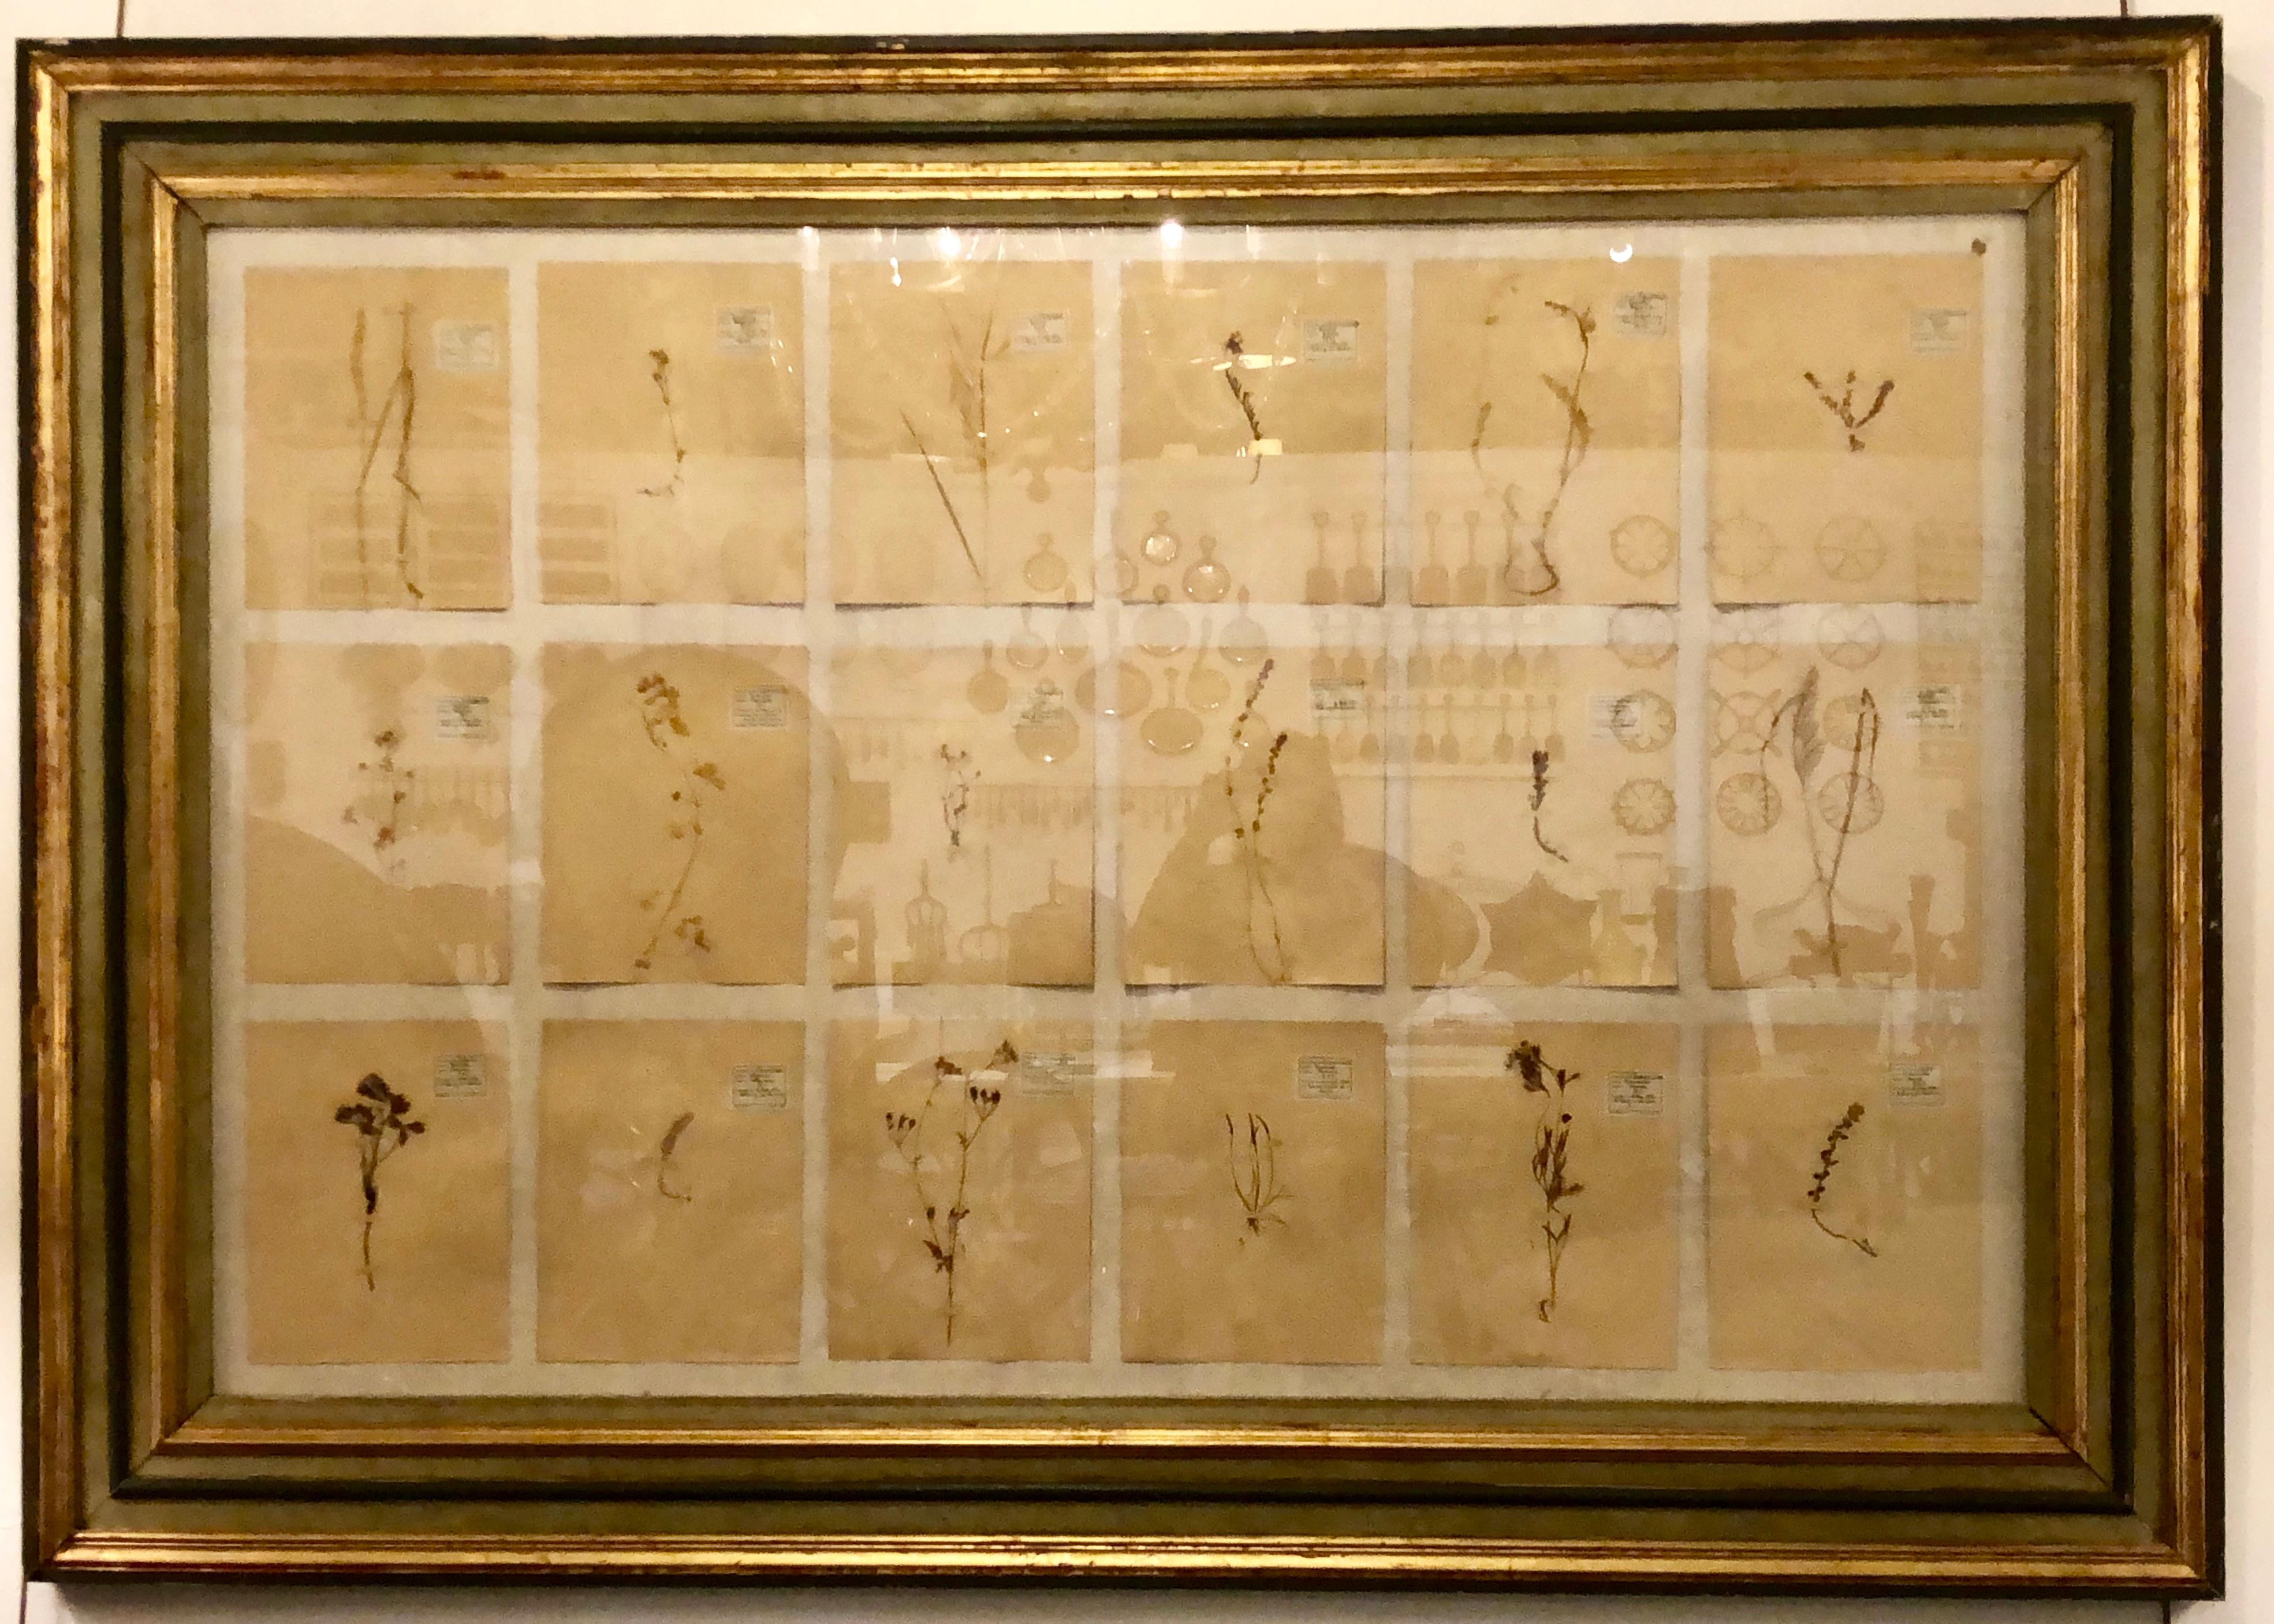 Large Botanical in a fine antique frame under glass Prov. Parc Monceau. The frame parcel gilt and paint decorated having eighteen botanicals inside. This is a large and impressive work of art that is certain to make a huge statement in any room in